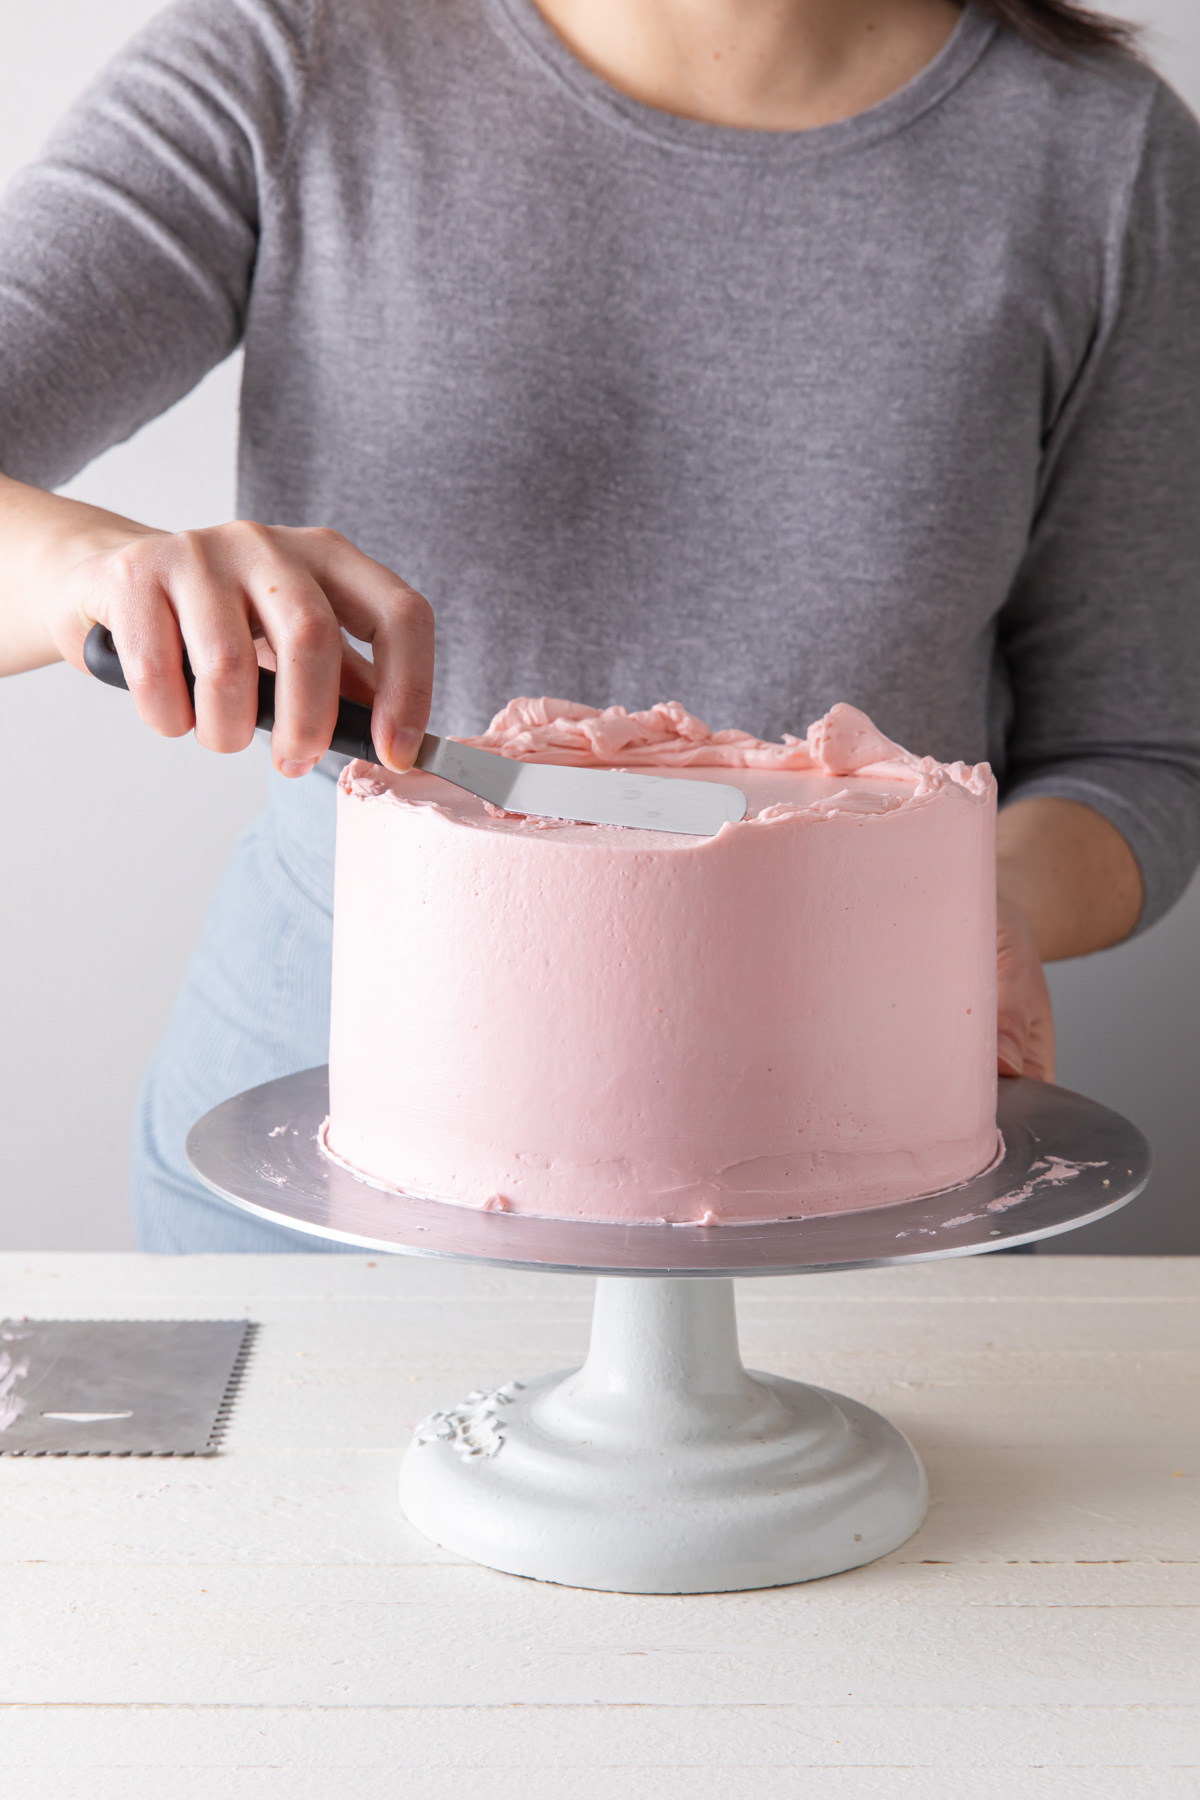 Frosting a cake with pink buttercream and an offset spatula